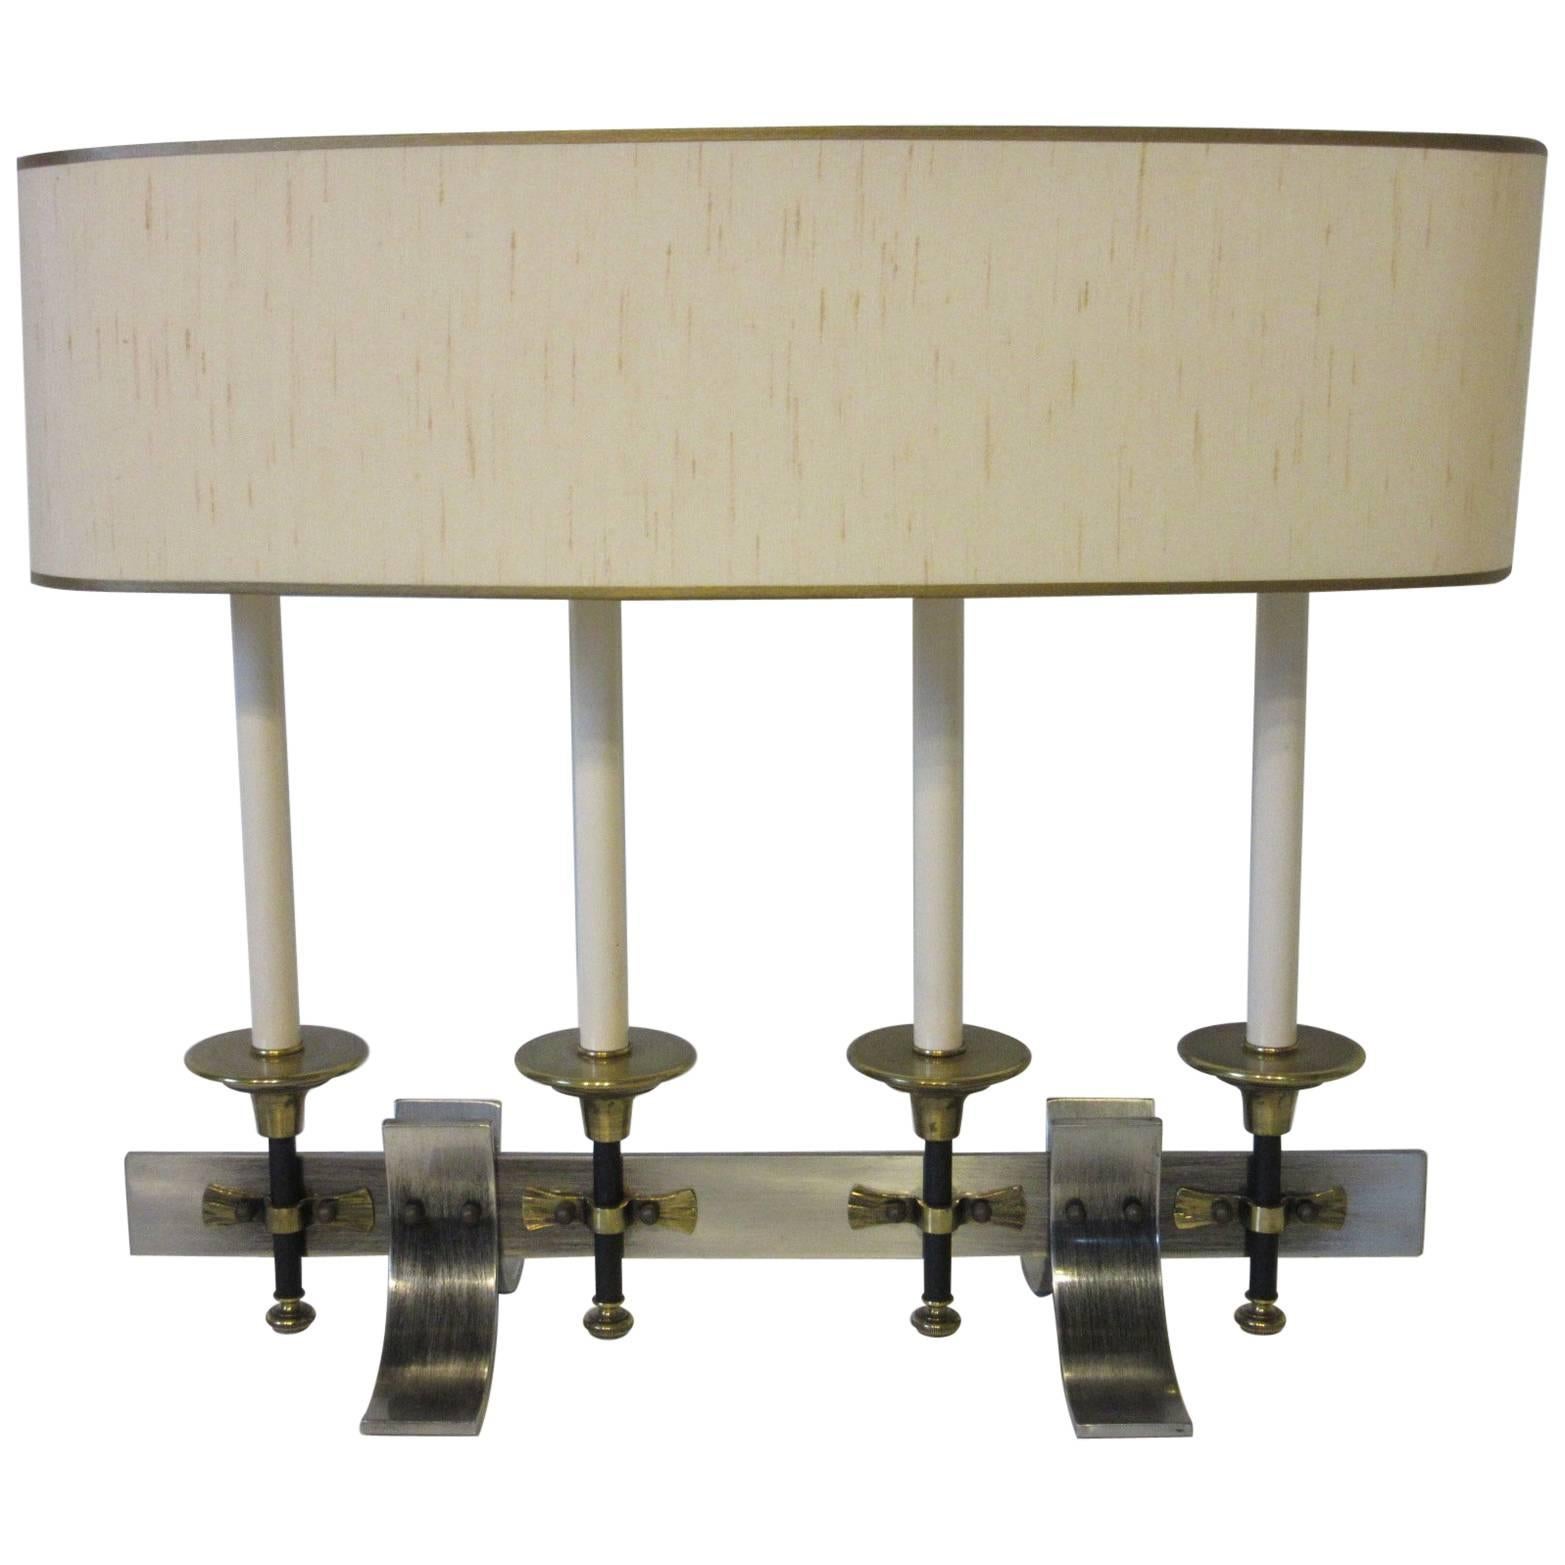 Brass / Brushed Metal Table Lamp in the style of Stiffel and Parzinger